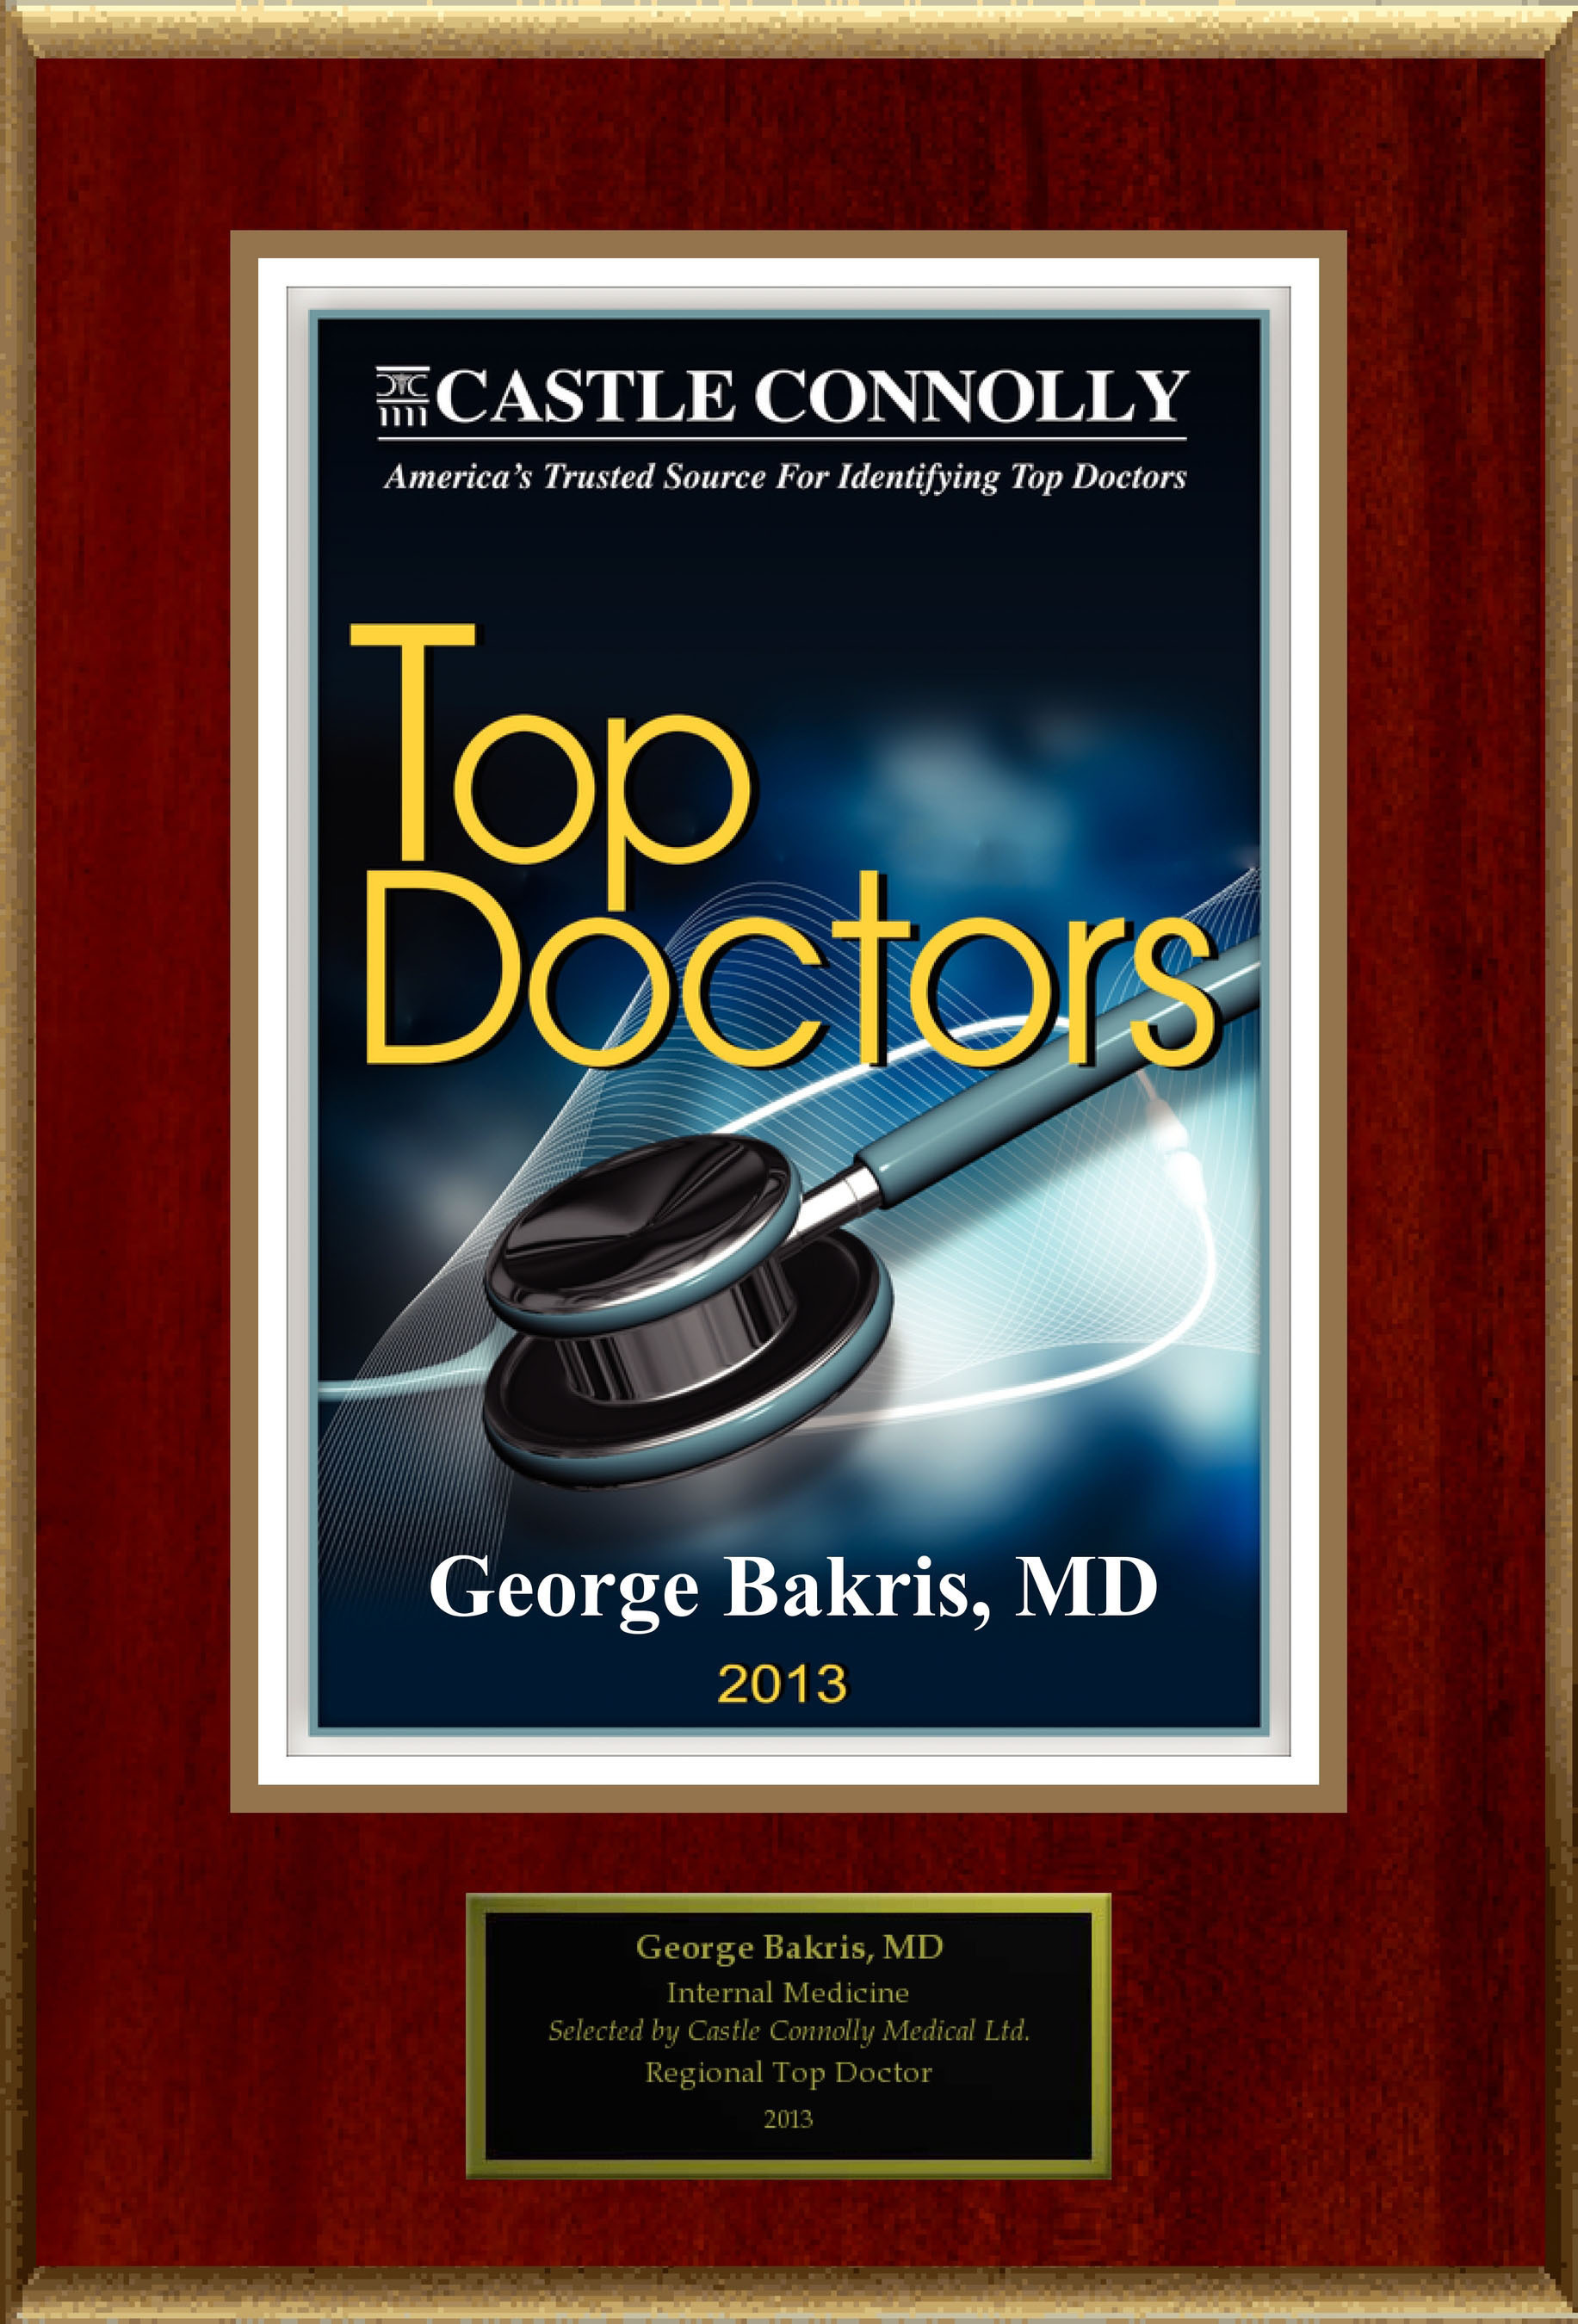 Dr. George Bakris is recognized among Castle Connolly's Top Doctors(R) for Chicago, IL region in 2013. (PRNewsFoto/American Registry) (PRNewsFoto/AMERICAN REGISTRY)